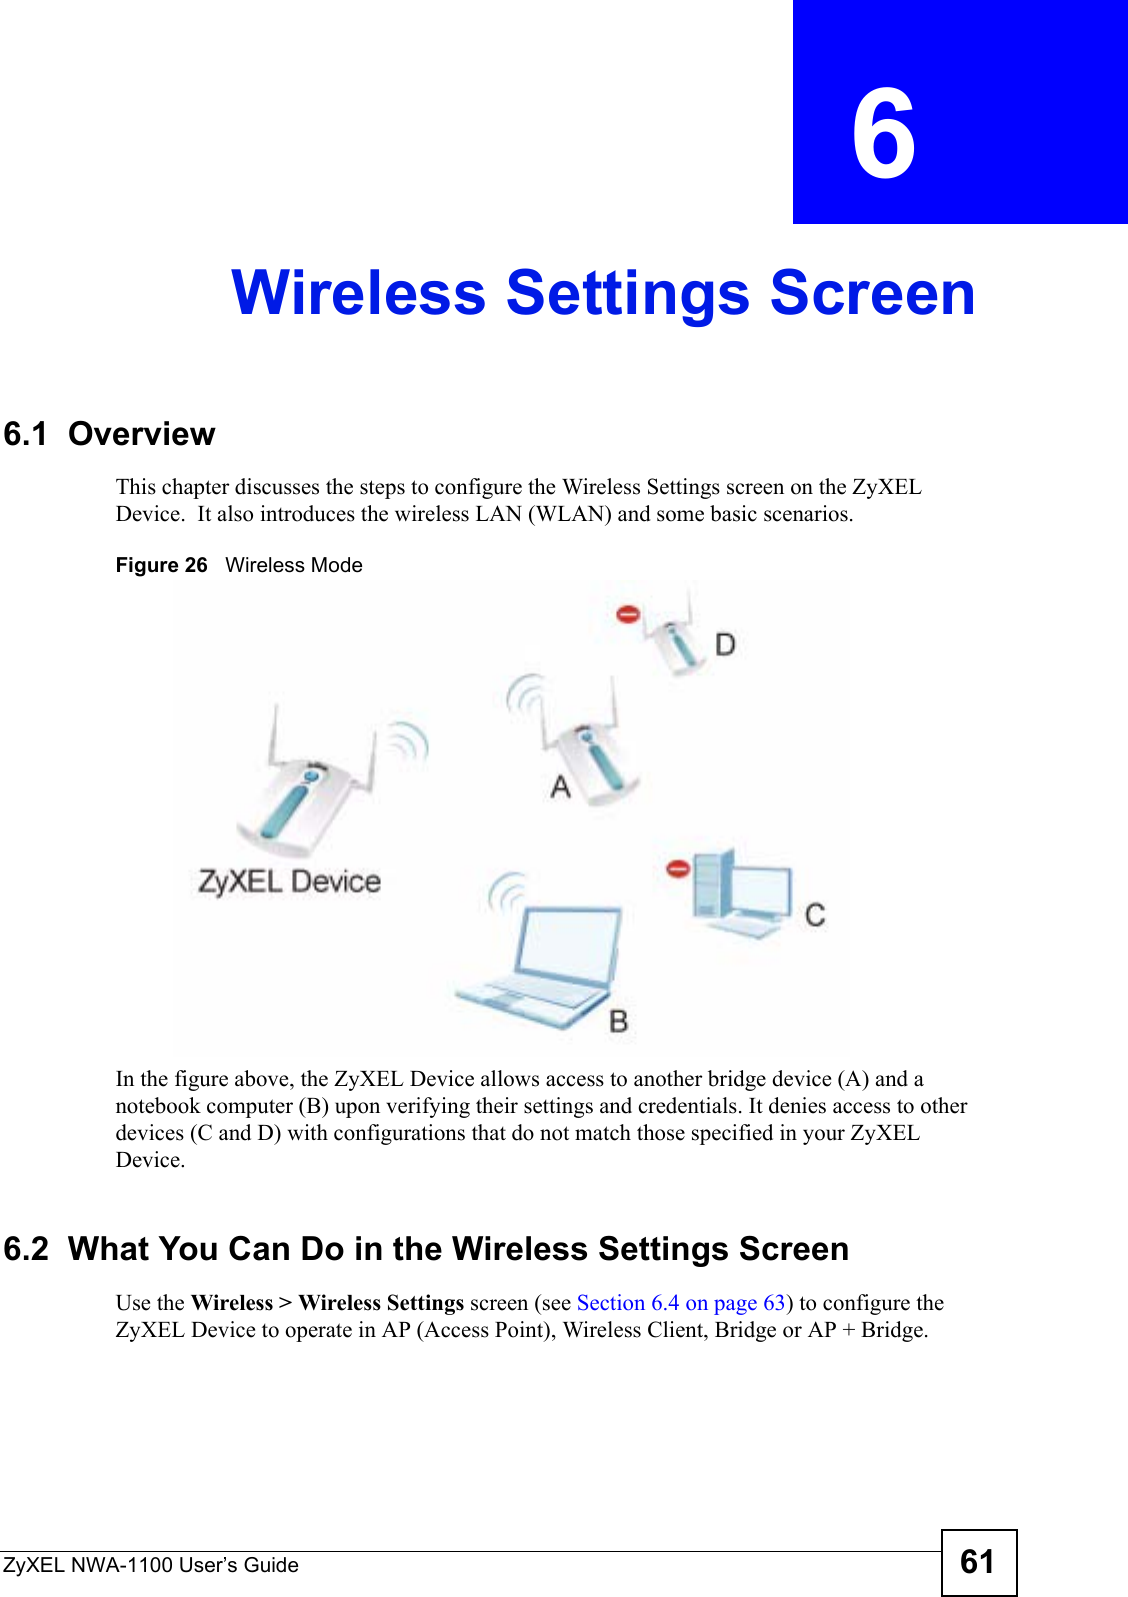 ZyXEL NWA-1100 User’s Guide 61CHAPTER  6 Wireless Settings Screen6.1  OverviewThis chapter discusses the steps to configure the Wireless Settings screen on the ZyXEL Device.  It also introduces the wireless LAN (WLAN) and some basic scenarios.Figure 26   Wireless ModeIn the figure above, the ZyXEL Device allows access to another bridge device (A) and a notebook computer (B) upon verifying their settings and credentials. It denies access to other devices (C and D) with configurations that do not match those specified in your ZyXEL Device.6.2  What You Can Do in the Wireless Settings ScreenUse the Wireless &gt; Wireless Settings screen (see Section 6.4 on page 63) to configure the ZyXEL Device to operate in AP (Access Point), Wireless Client, Bridge or AP + Bridge.